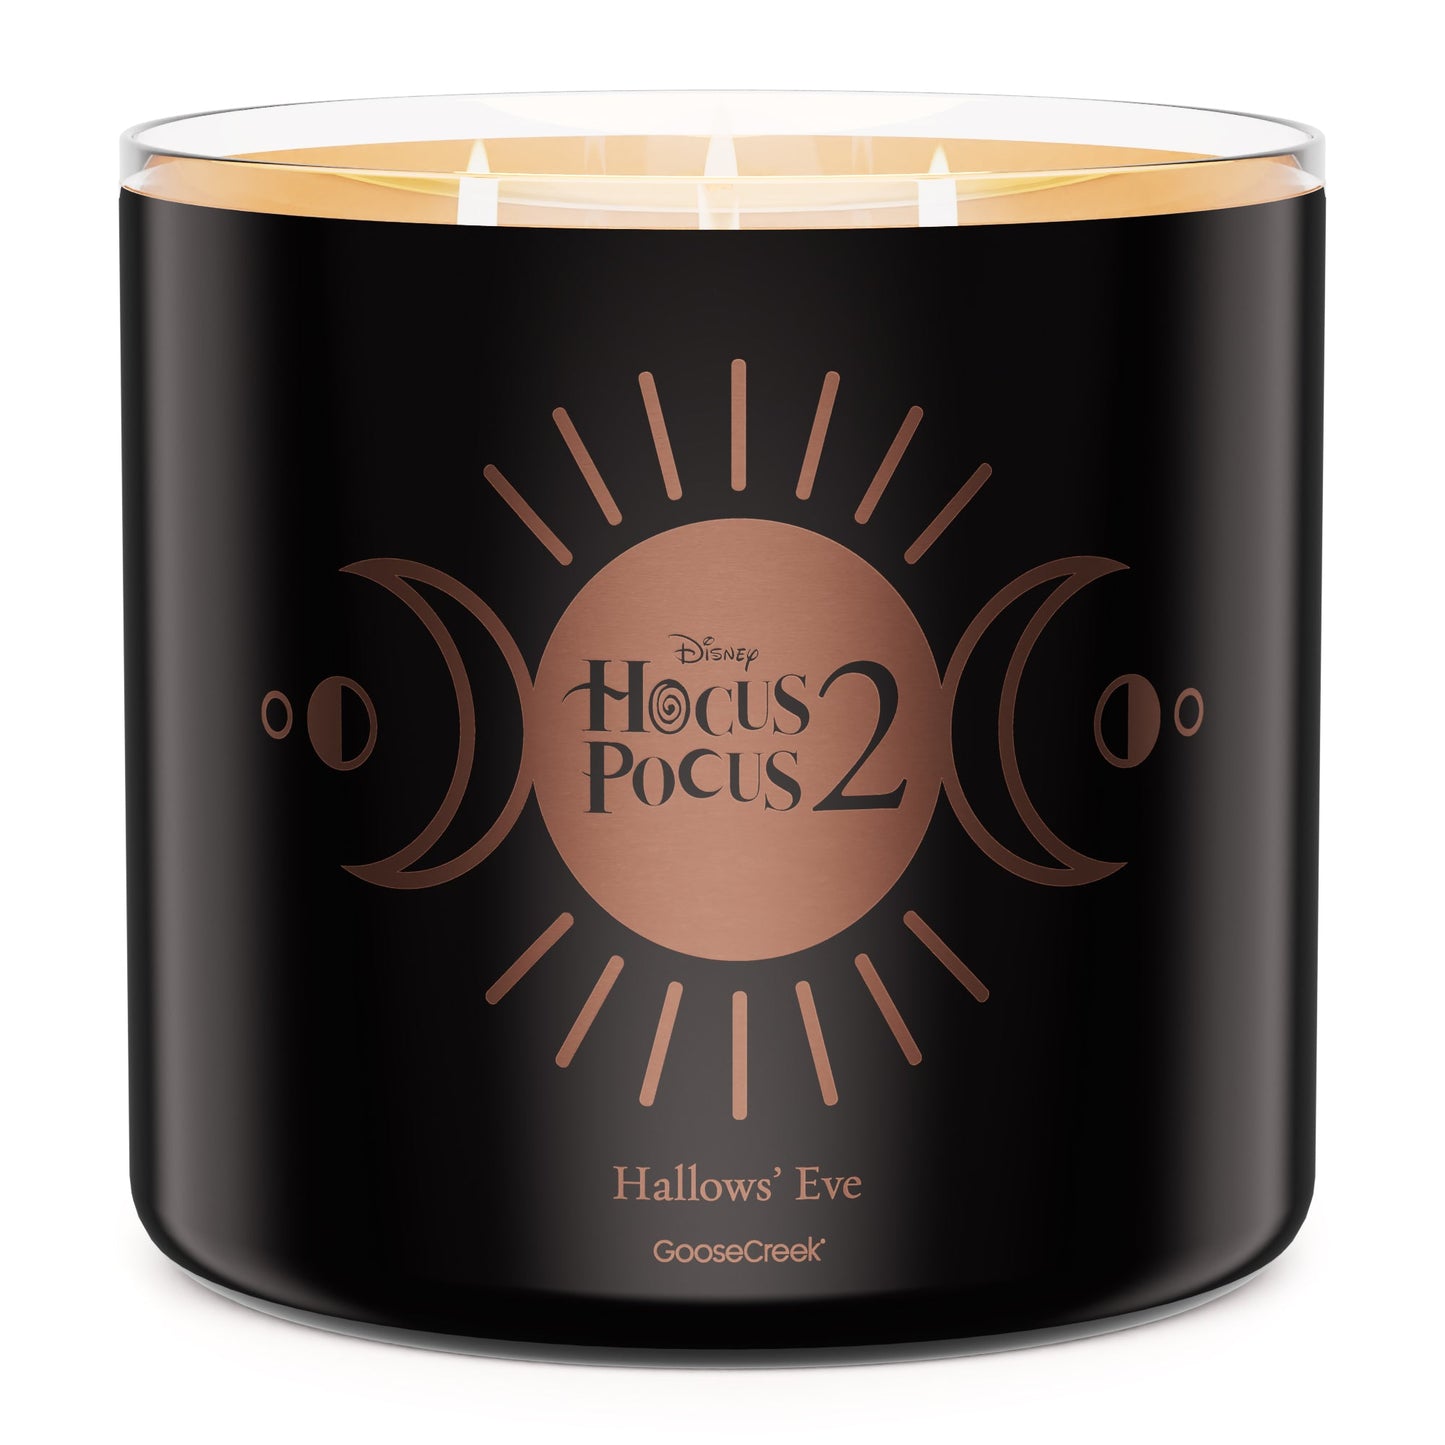 Hallows' Eve (Trick or Treat) 3-Wick Hocus Pocus 2 Candle